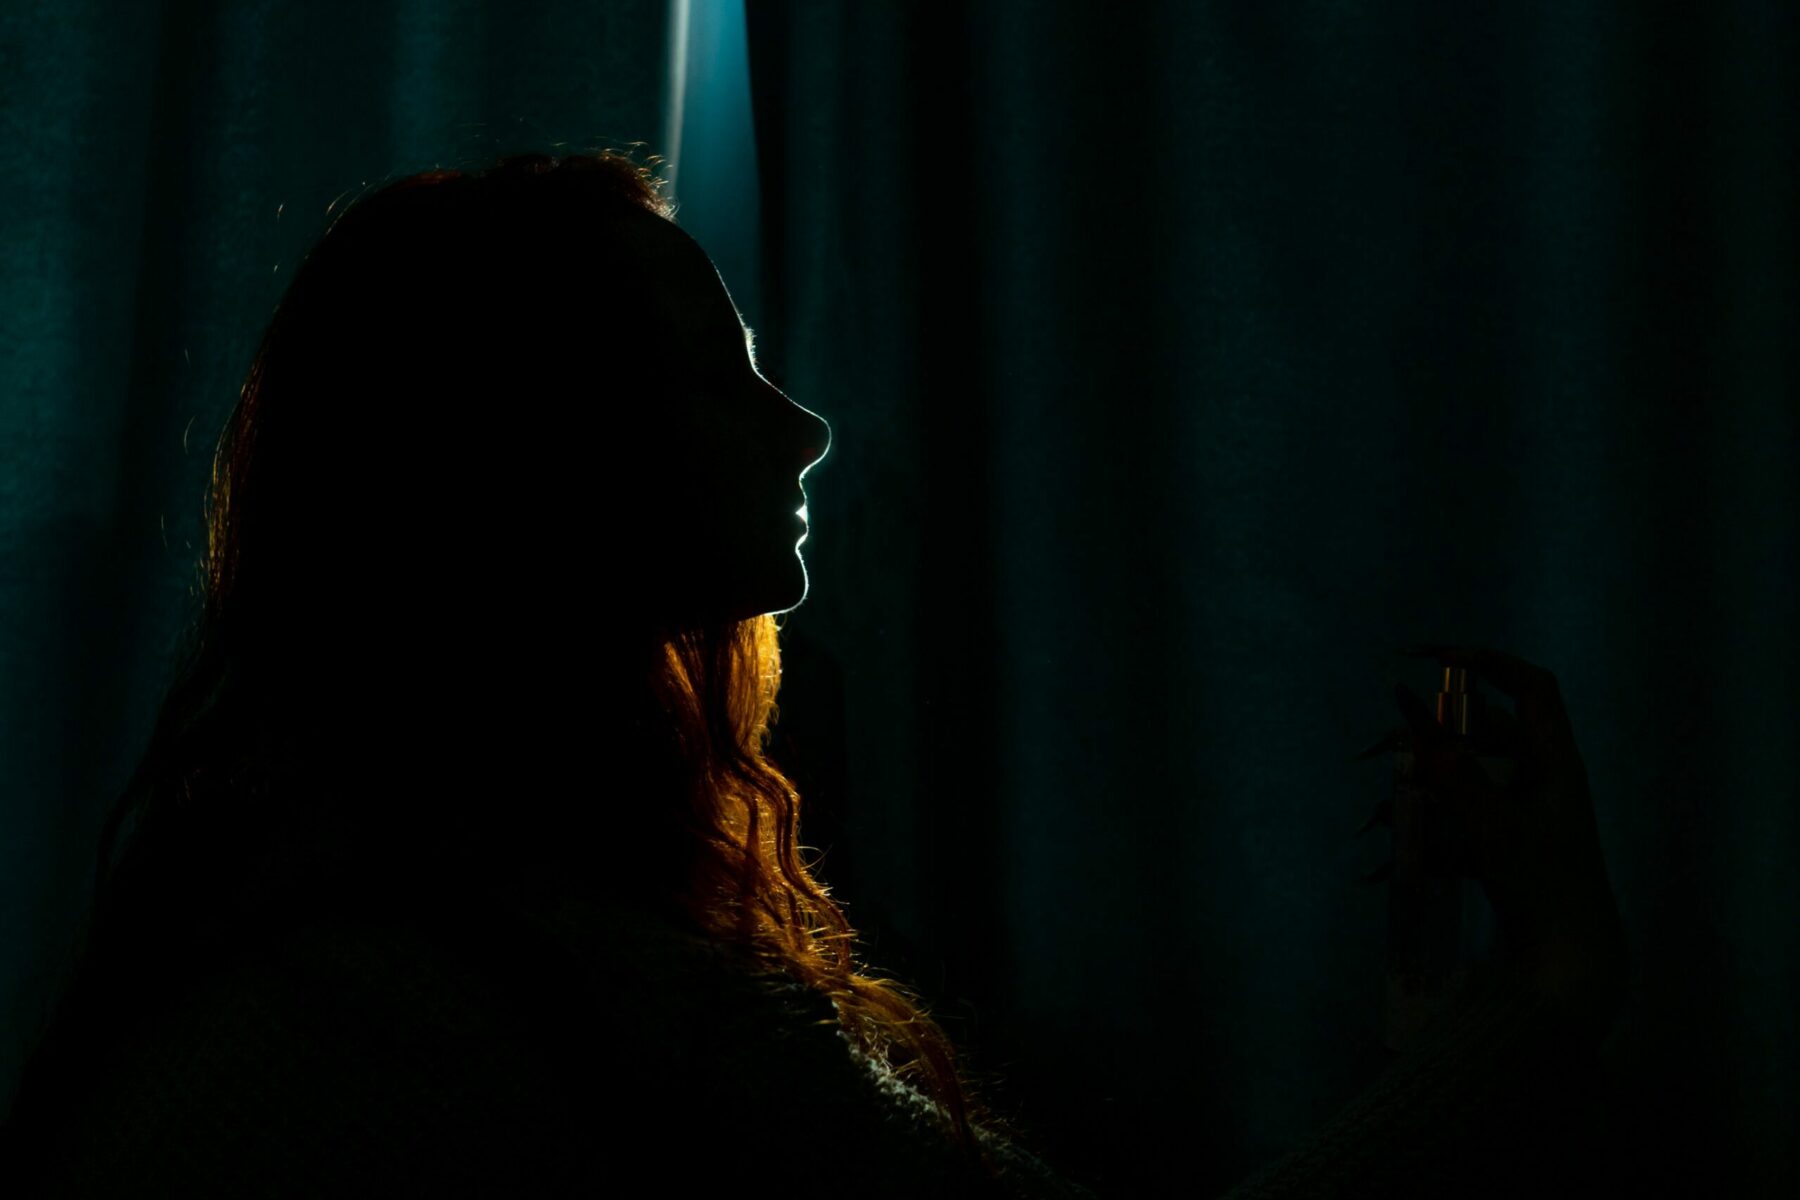 Silhouette of a young woman in the dark.